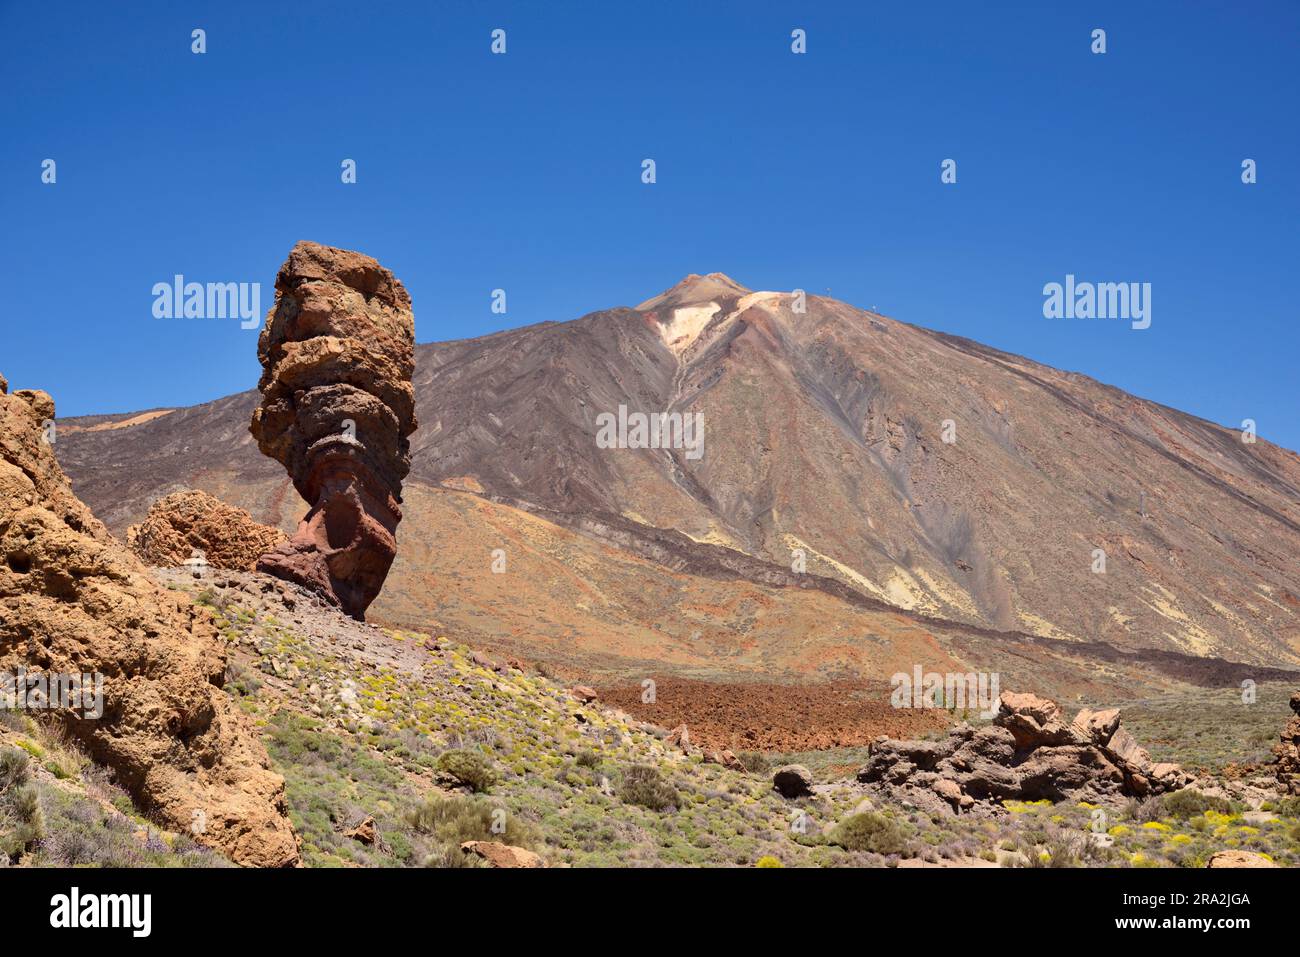 Spain, Canary Islands,Tenerife, Teide National Park listed as World Heritage by UNESCO, Roques de Garcia, Cinchado Rock at the foot of the volcano Teide volcano, the highest Spanish summit culminating at 3718 metres Stock Photo